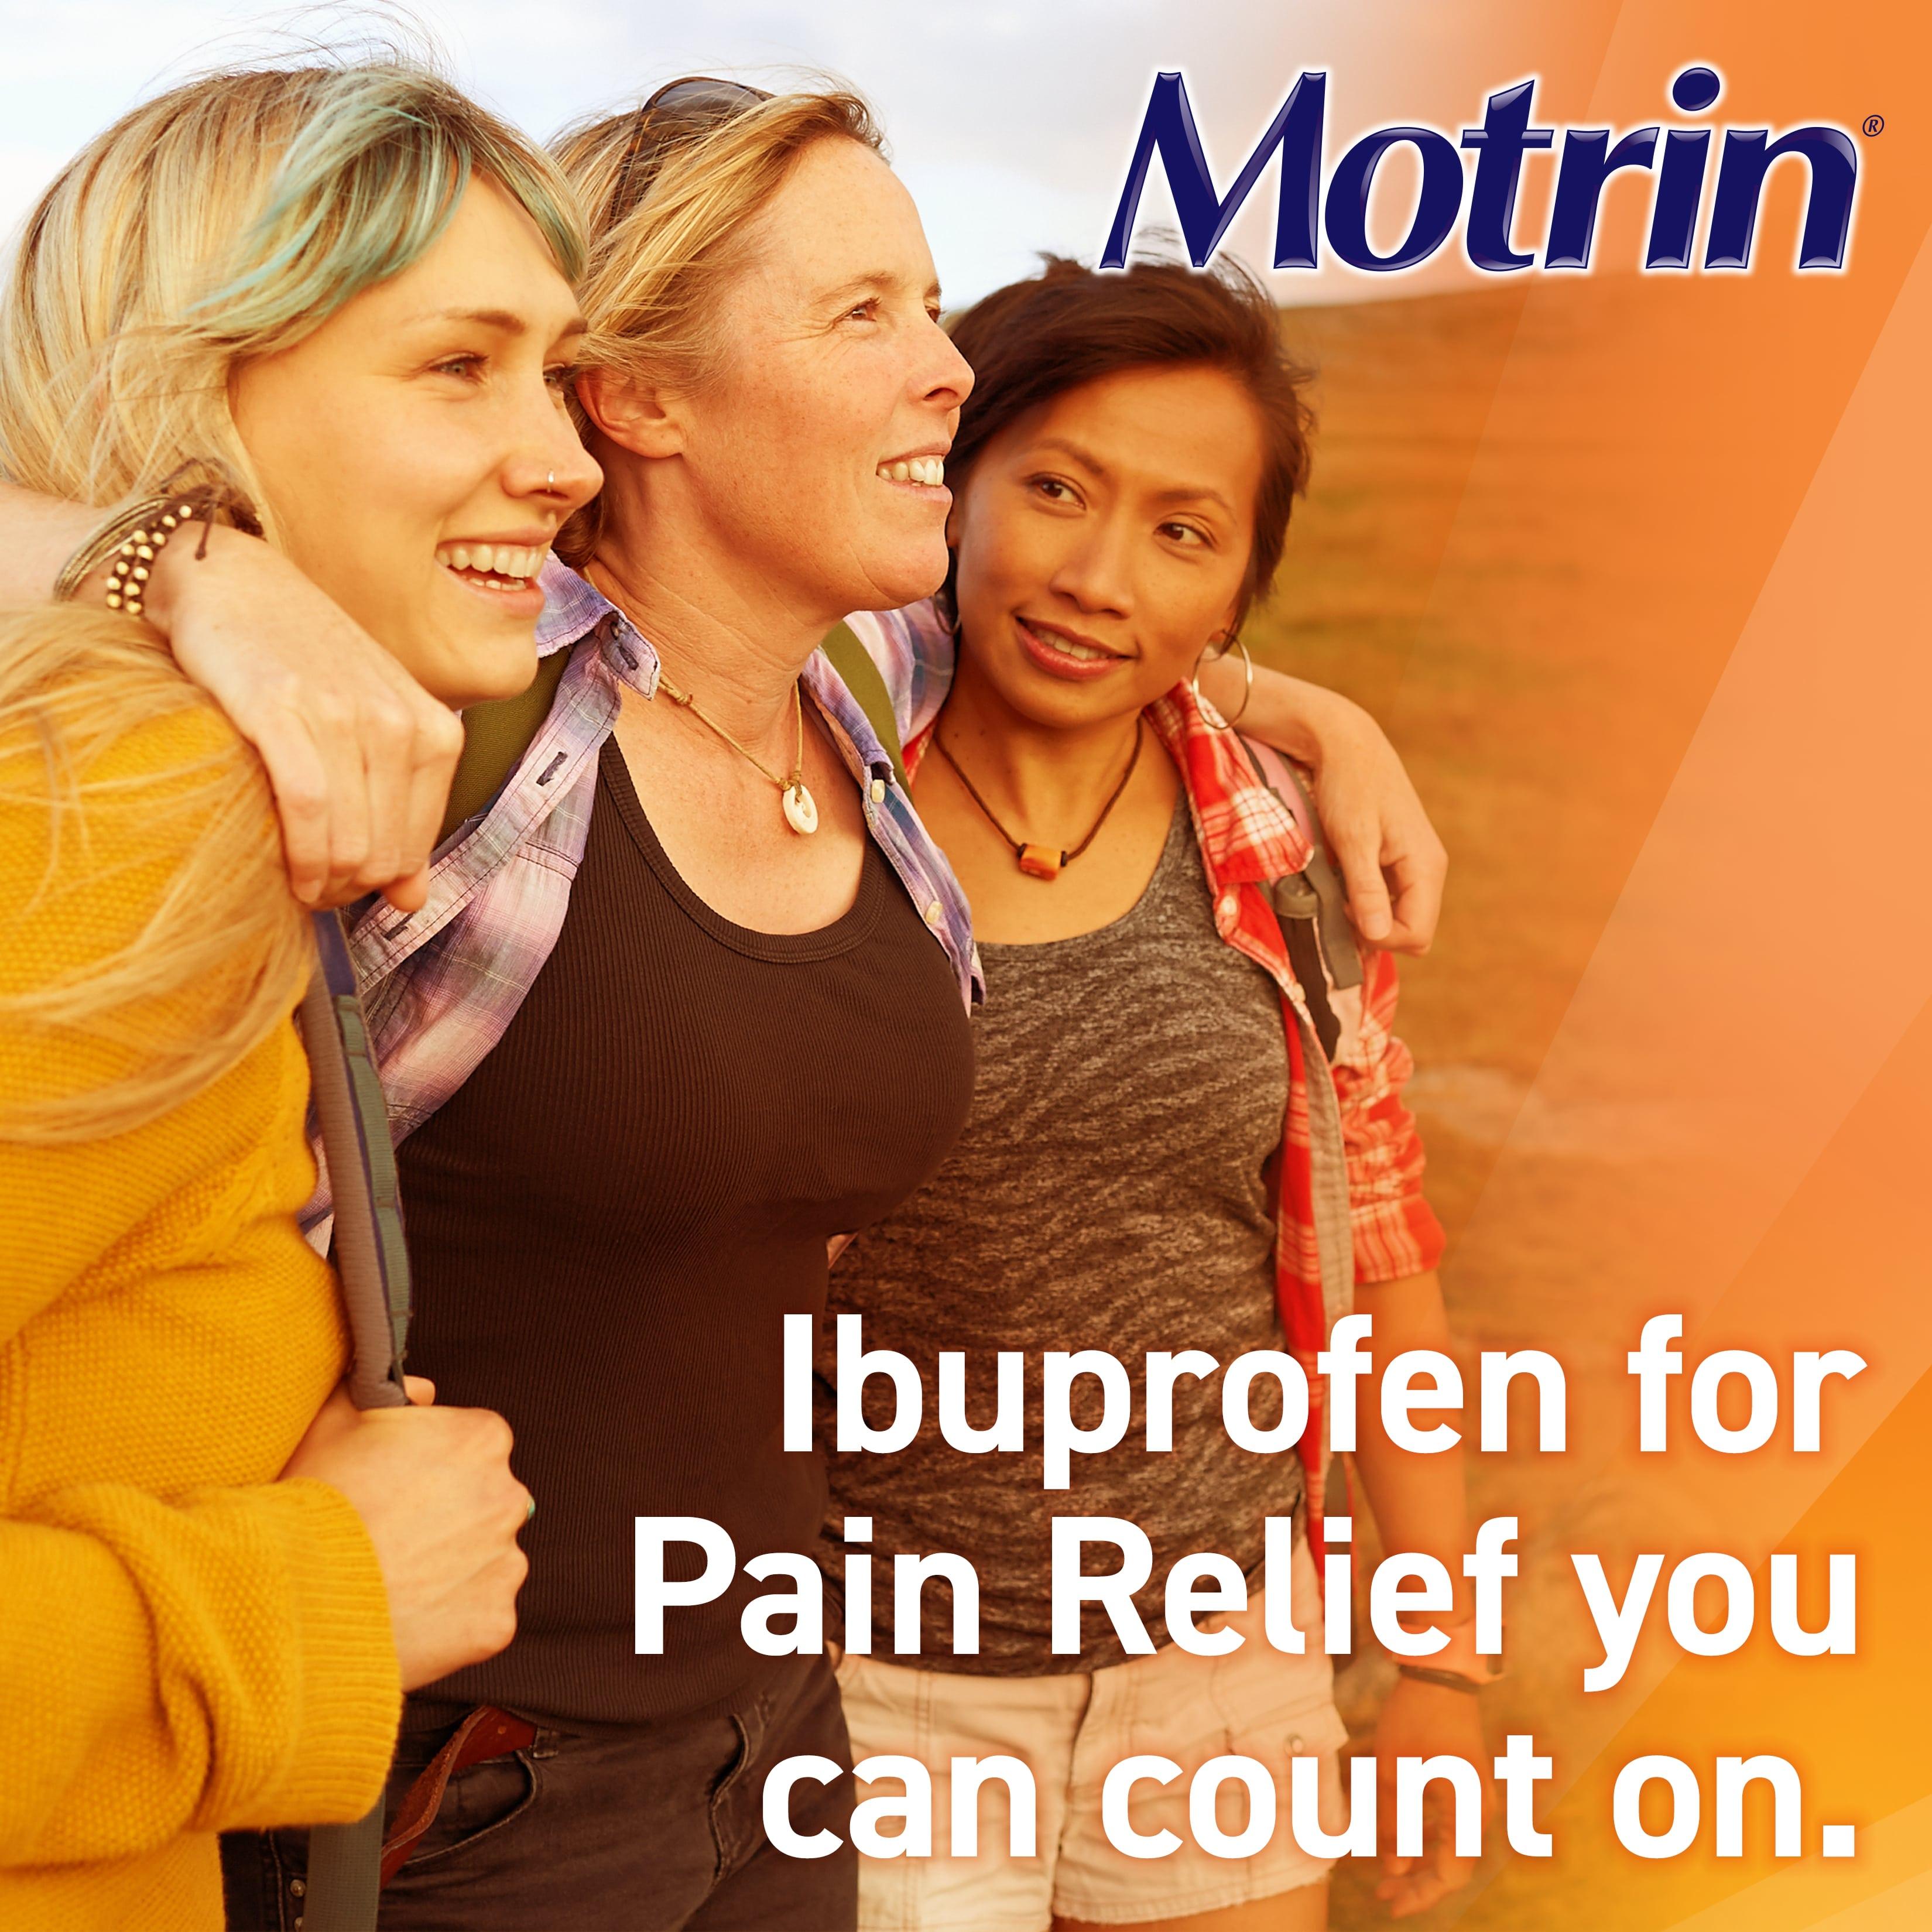 Motrin Ibuprofen pain relief you can count on